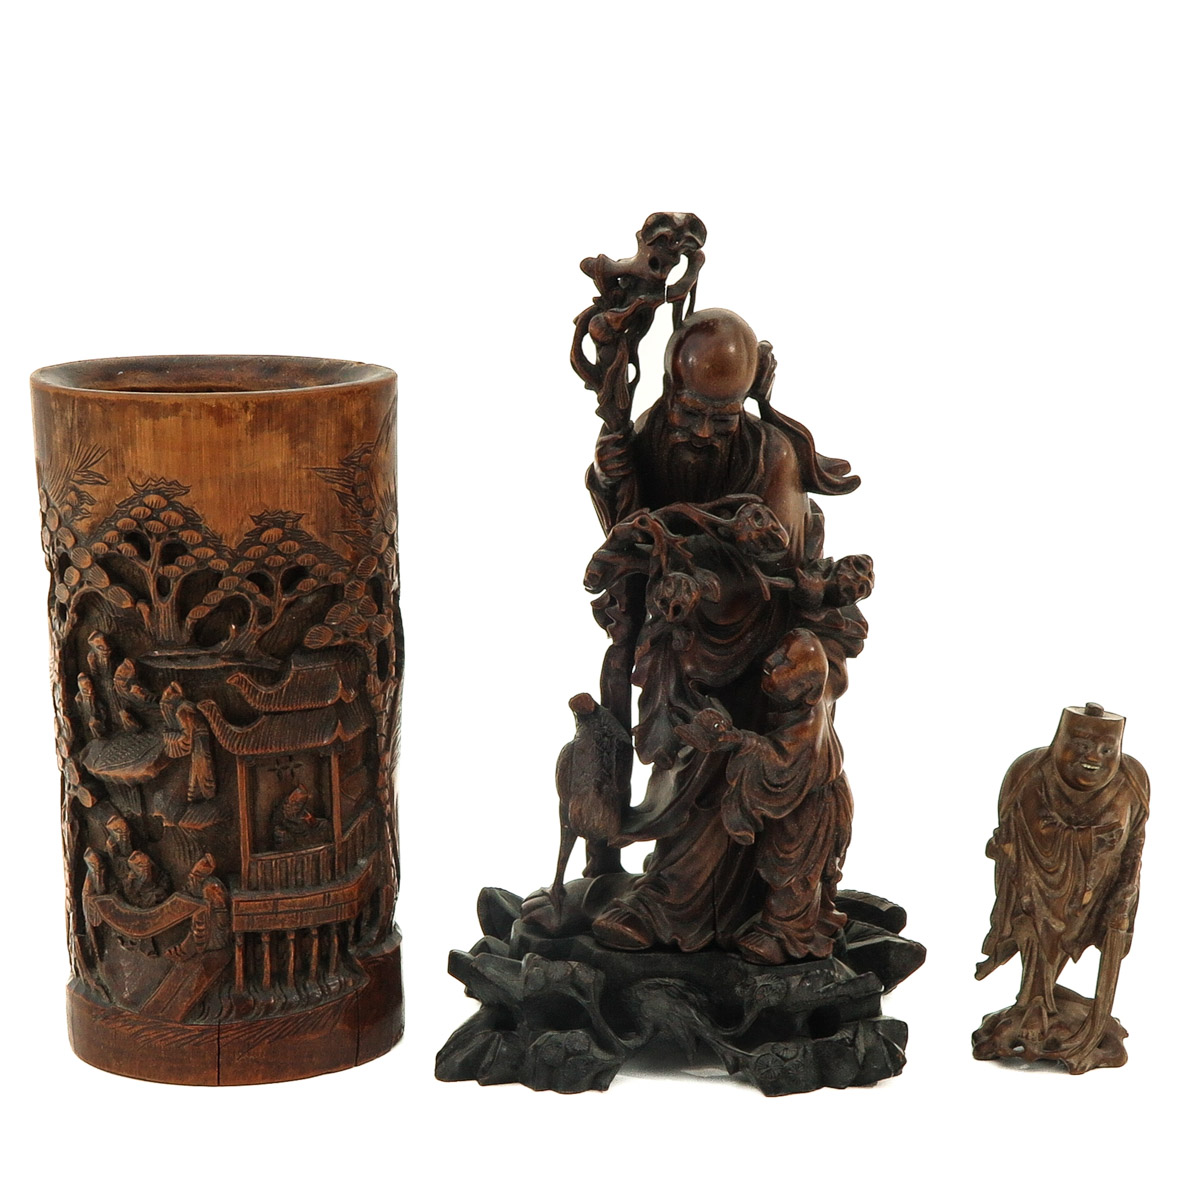 A Collection of 3 Carved Wood Items